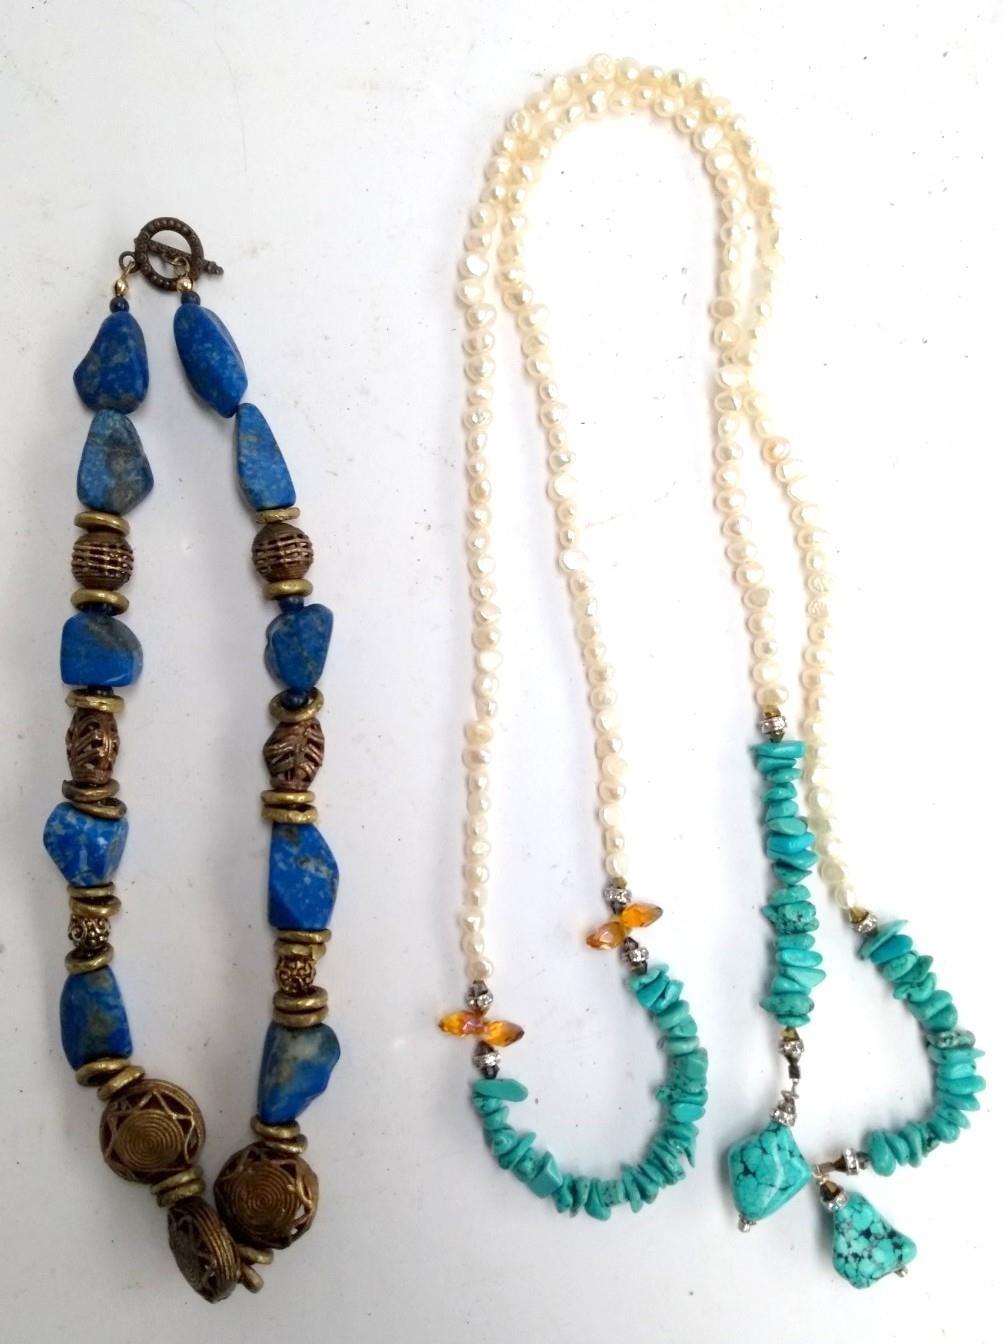 Necklace set with Lapis stones together with a turquoise and seed pearl necklace